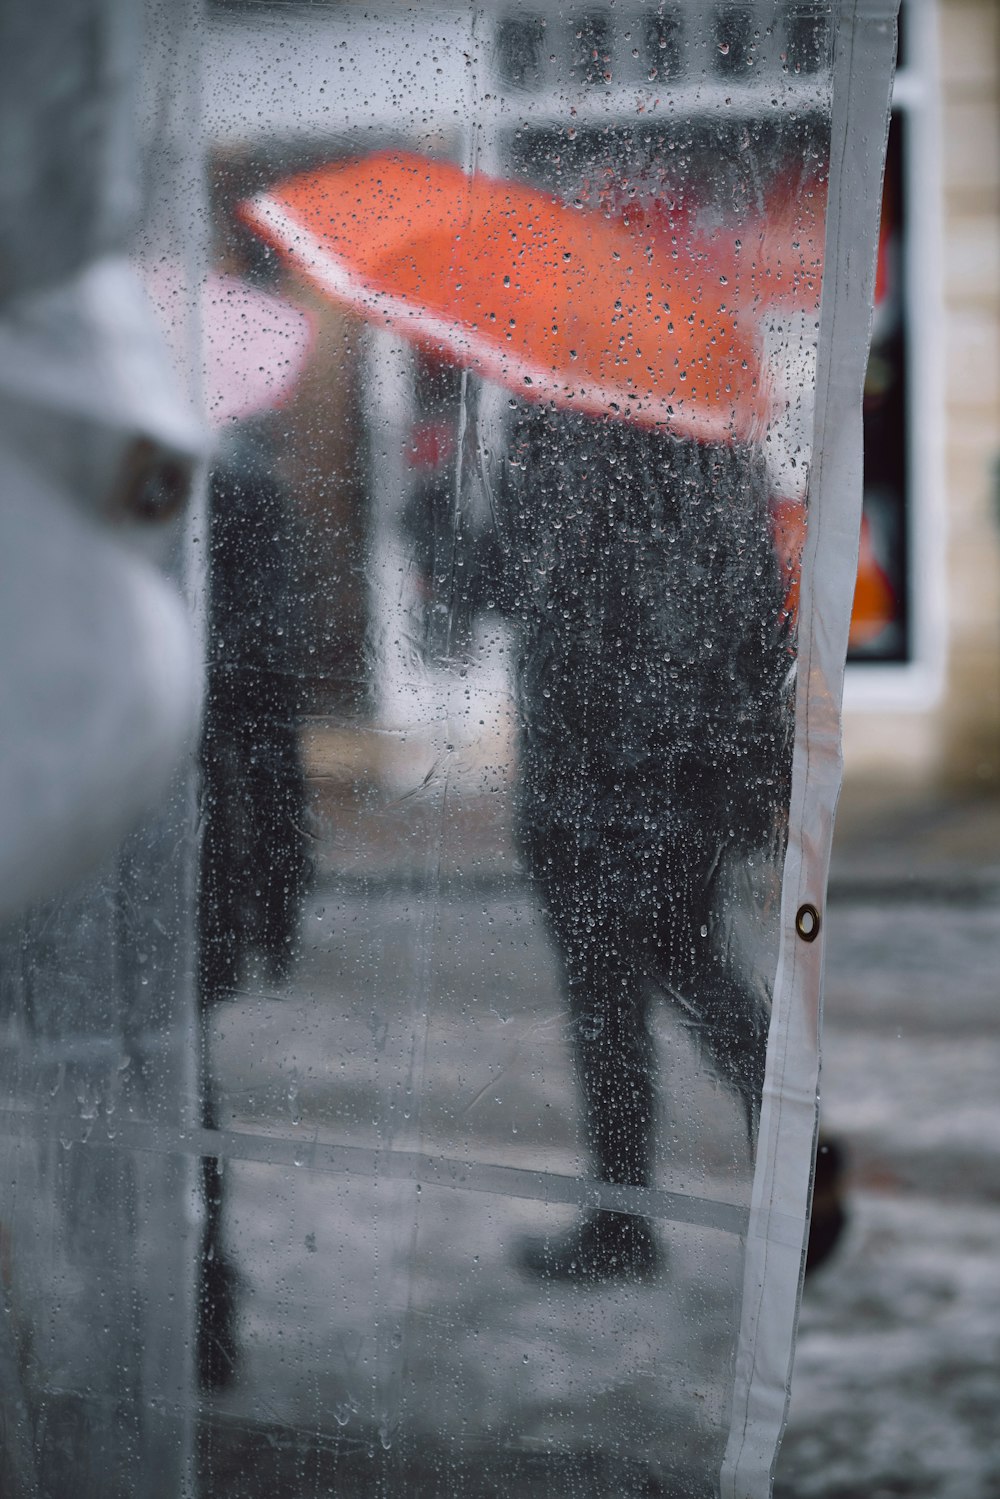 clear plastic coat with water drops showing people using umbrella